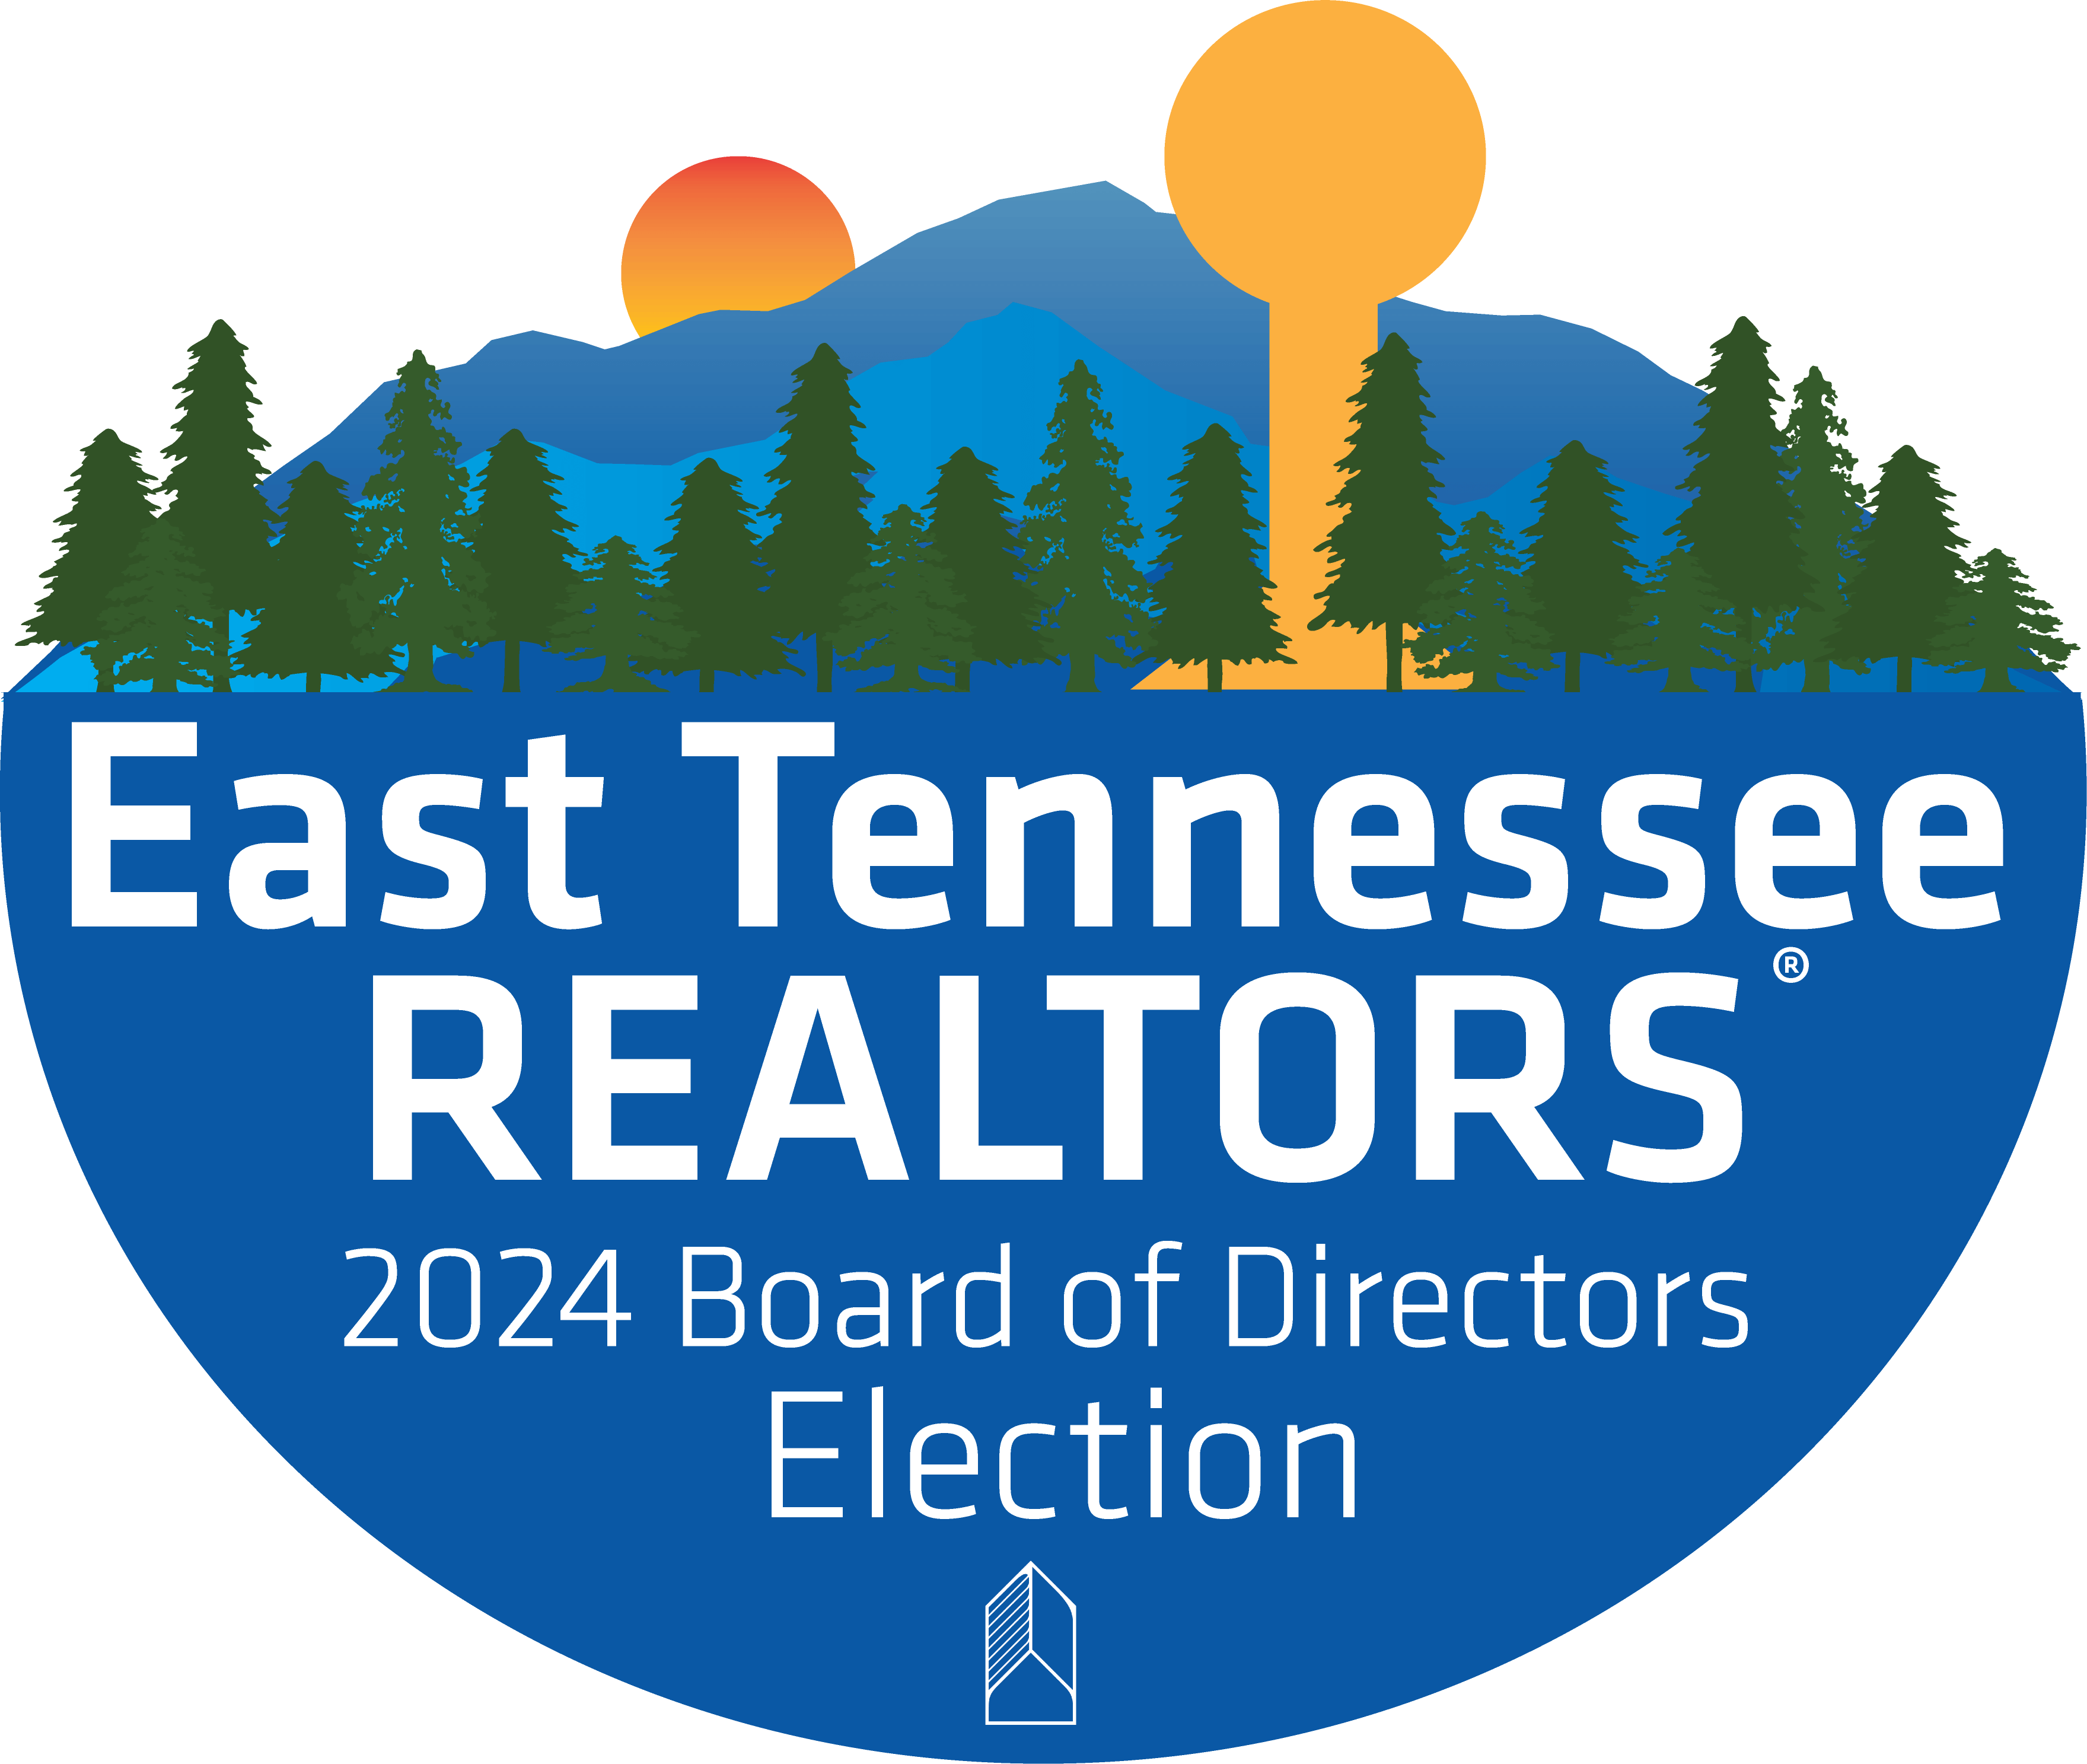 East Tennessee REALTORS 2024 Board of Directors Election